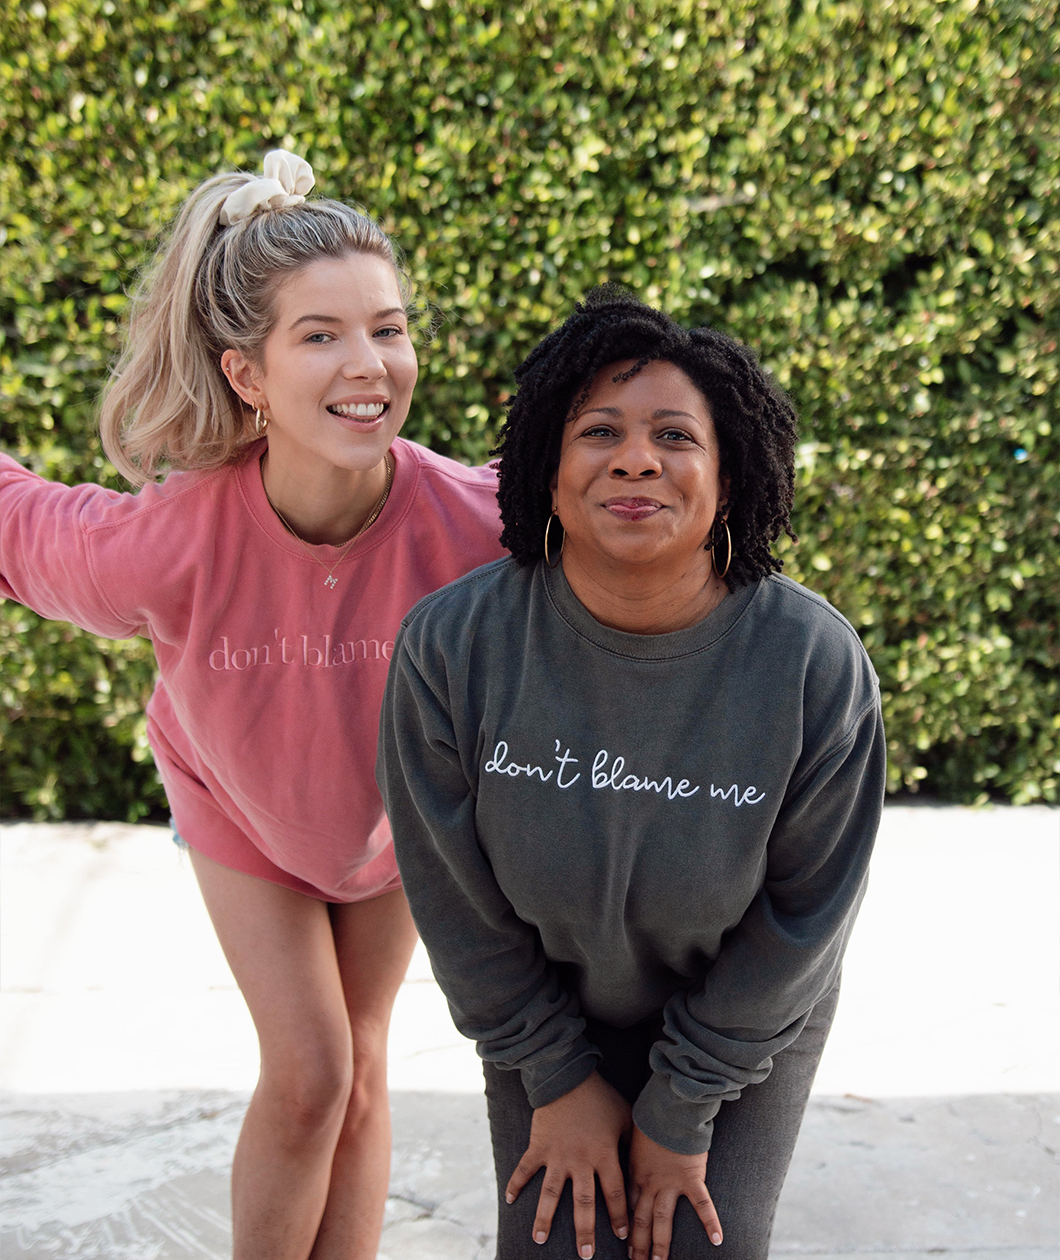 Meghan Rienks modeling a pink crewneck sweatshirt with “don’t blame me” across the chest in pink serif font and Melisa Monts modeling a gray crewneck sweatshirt with “don’t blame me” across chest in white cursive font - from Don’t Blame Me